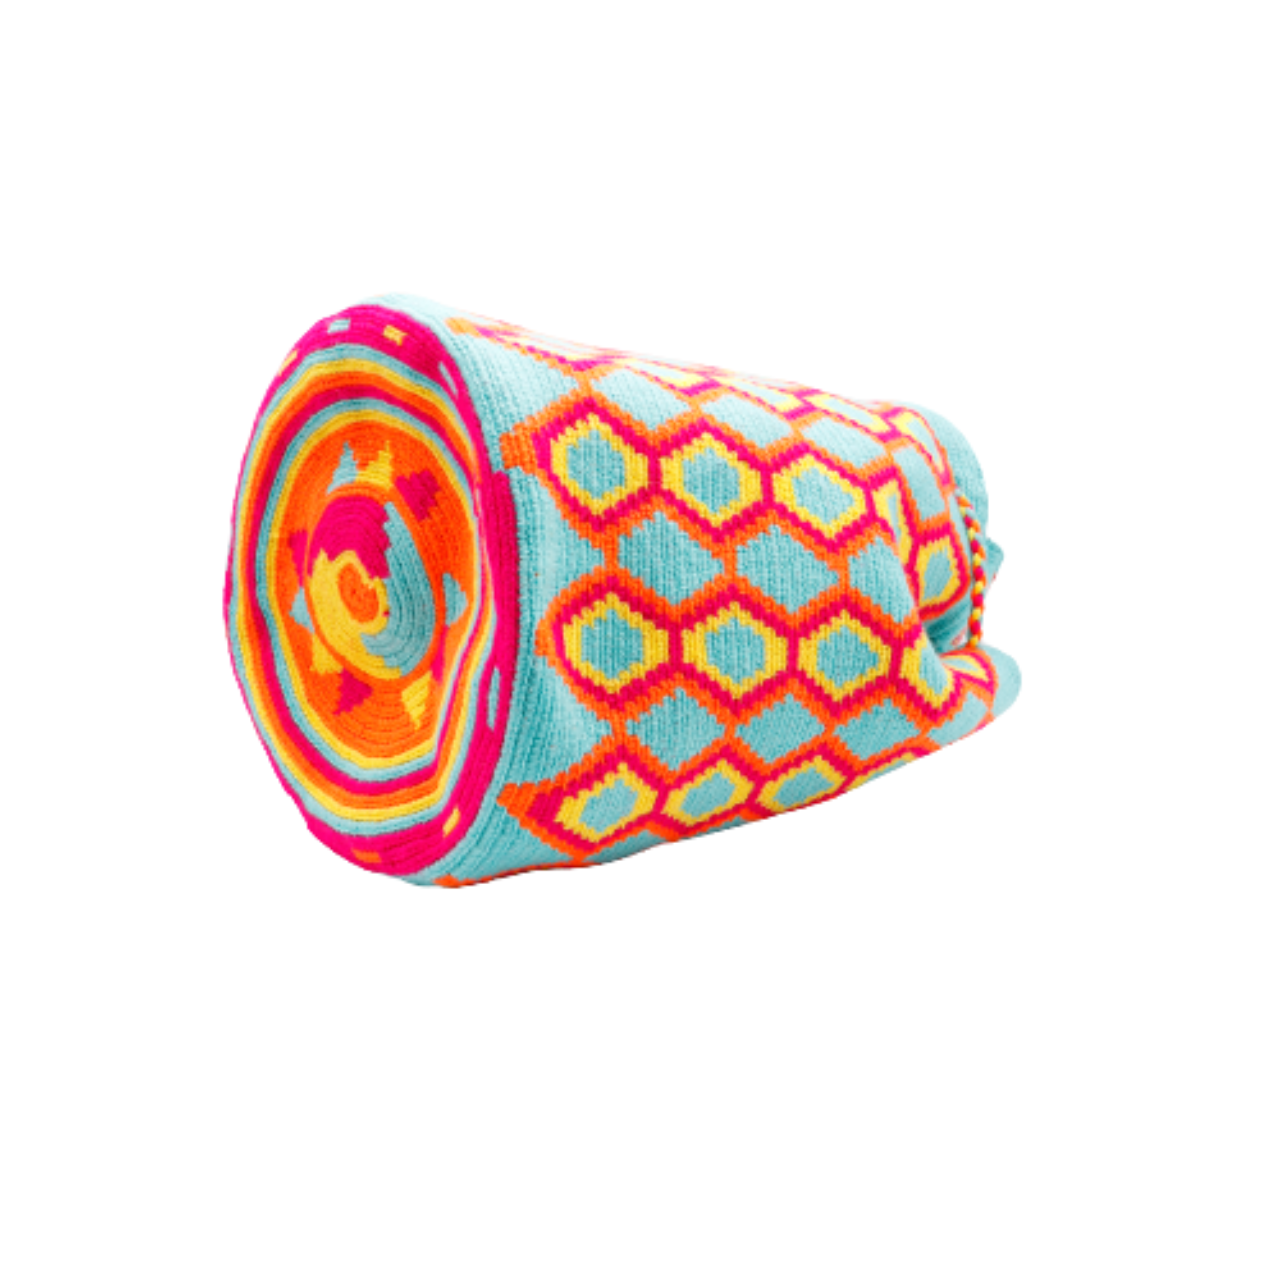 Mariajo Wayuu bag expertly crocheted by a skilled Wayuu artisan, featuring vibrant aqua, orange, magenta, and yellow hues. A visually attractive and chic accessory showcasing intricate craftsmanship.